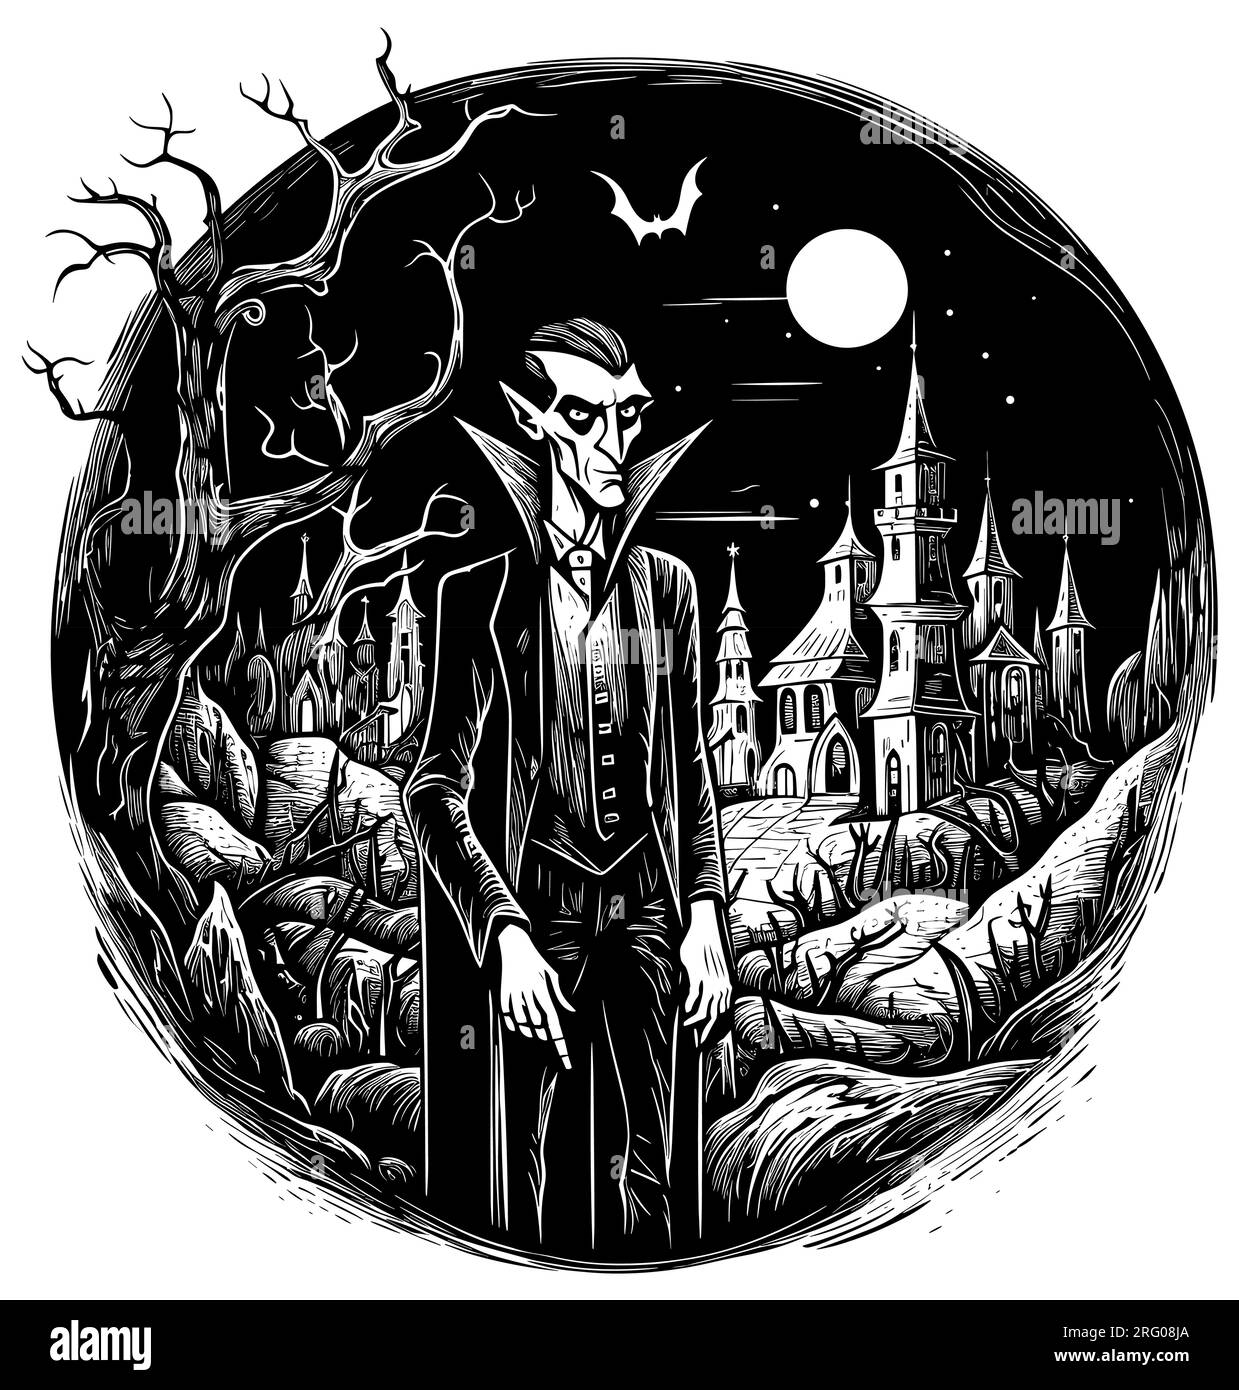 Count Dracula Black and White Stock Vector